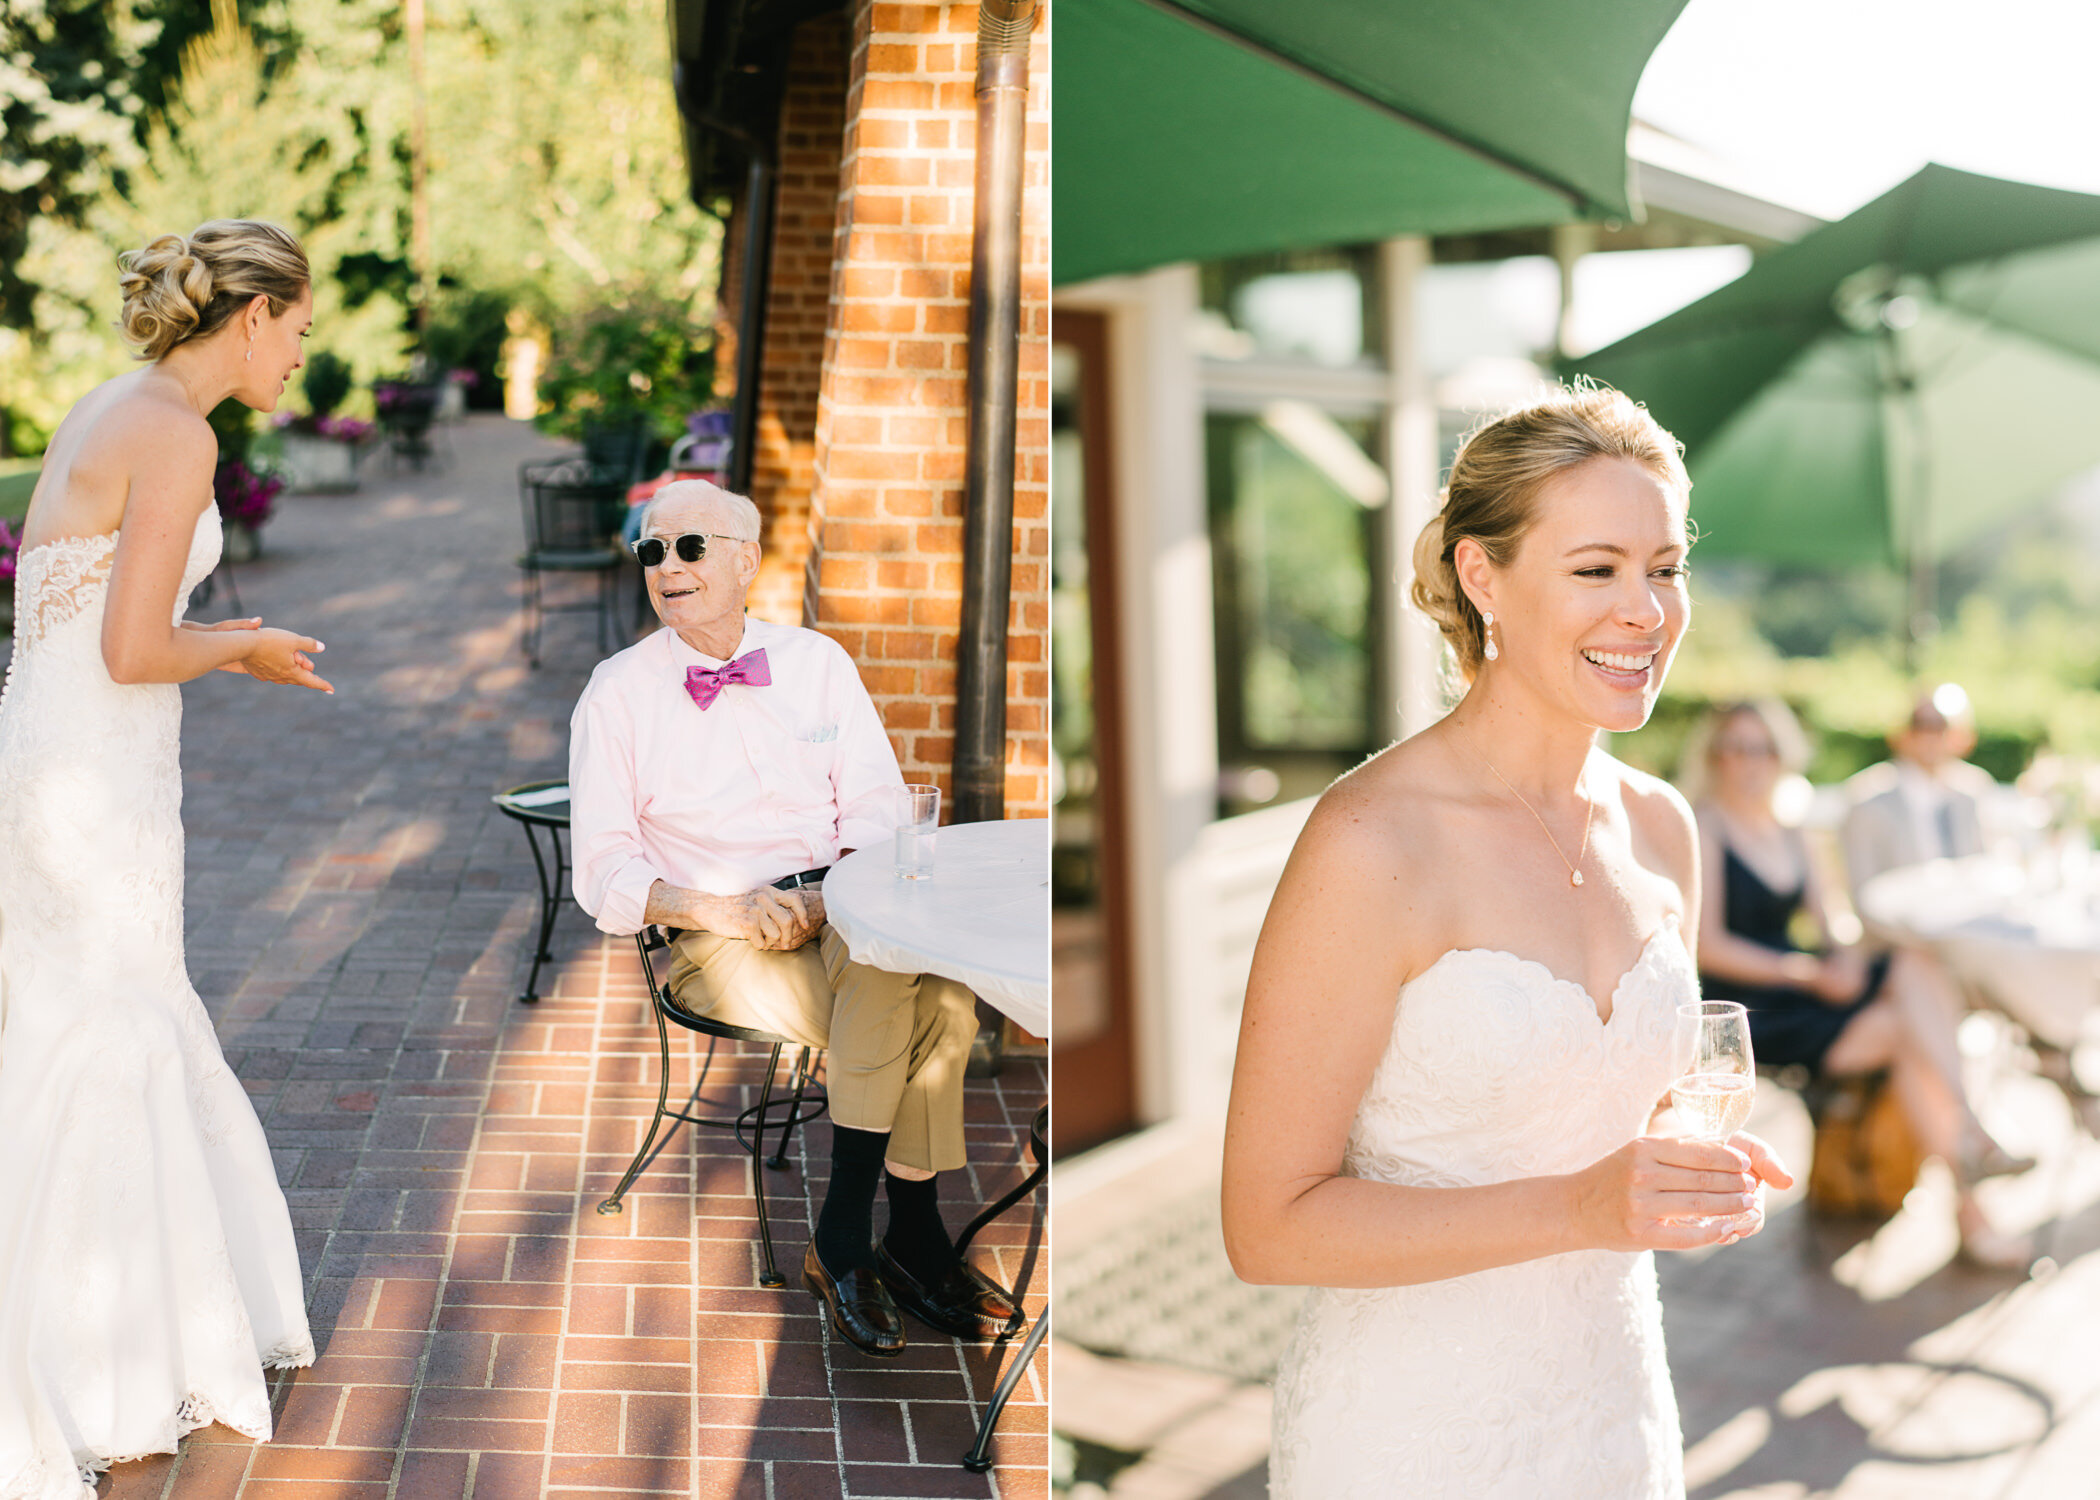  Gentleman with pink bow tie talks with bride in sunshine on the patio 